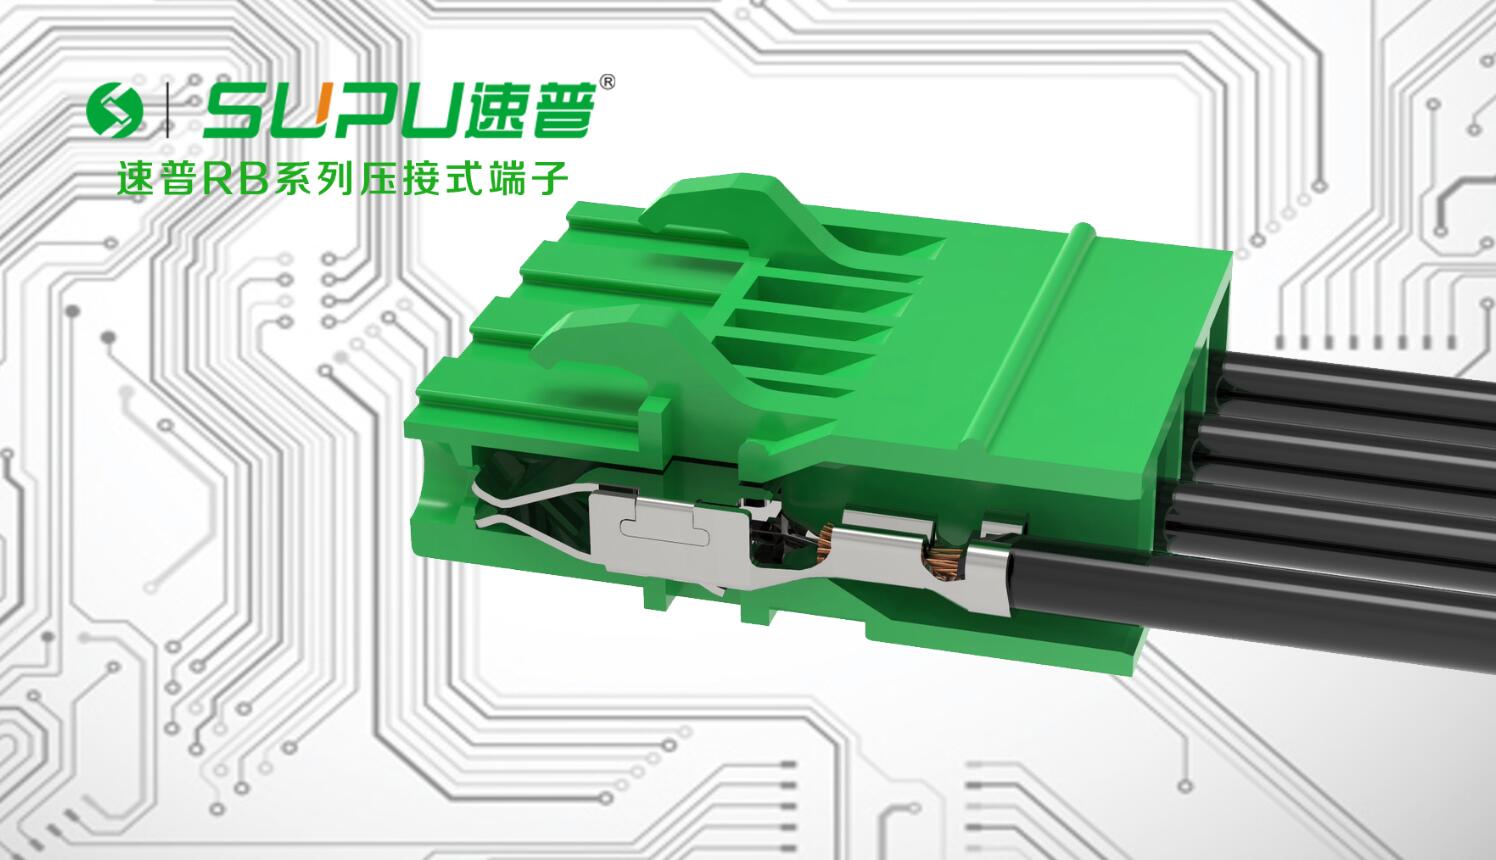 SUPU Preference |RB series crimping terminal blocks- Reliable Efficient